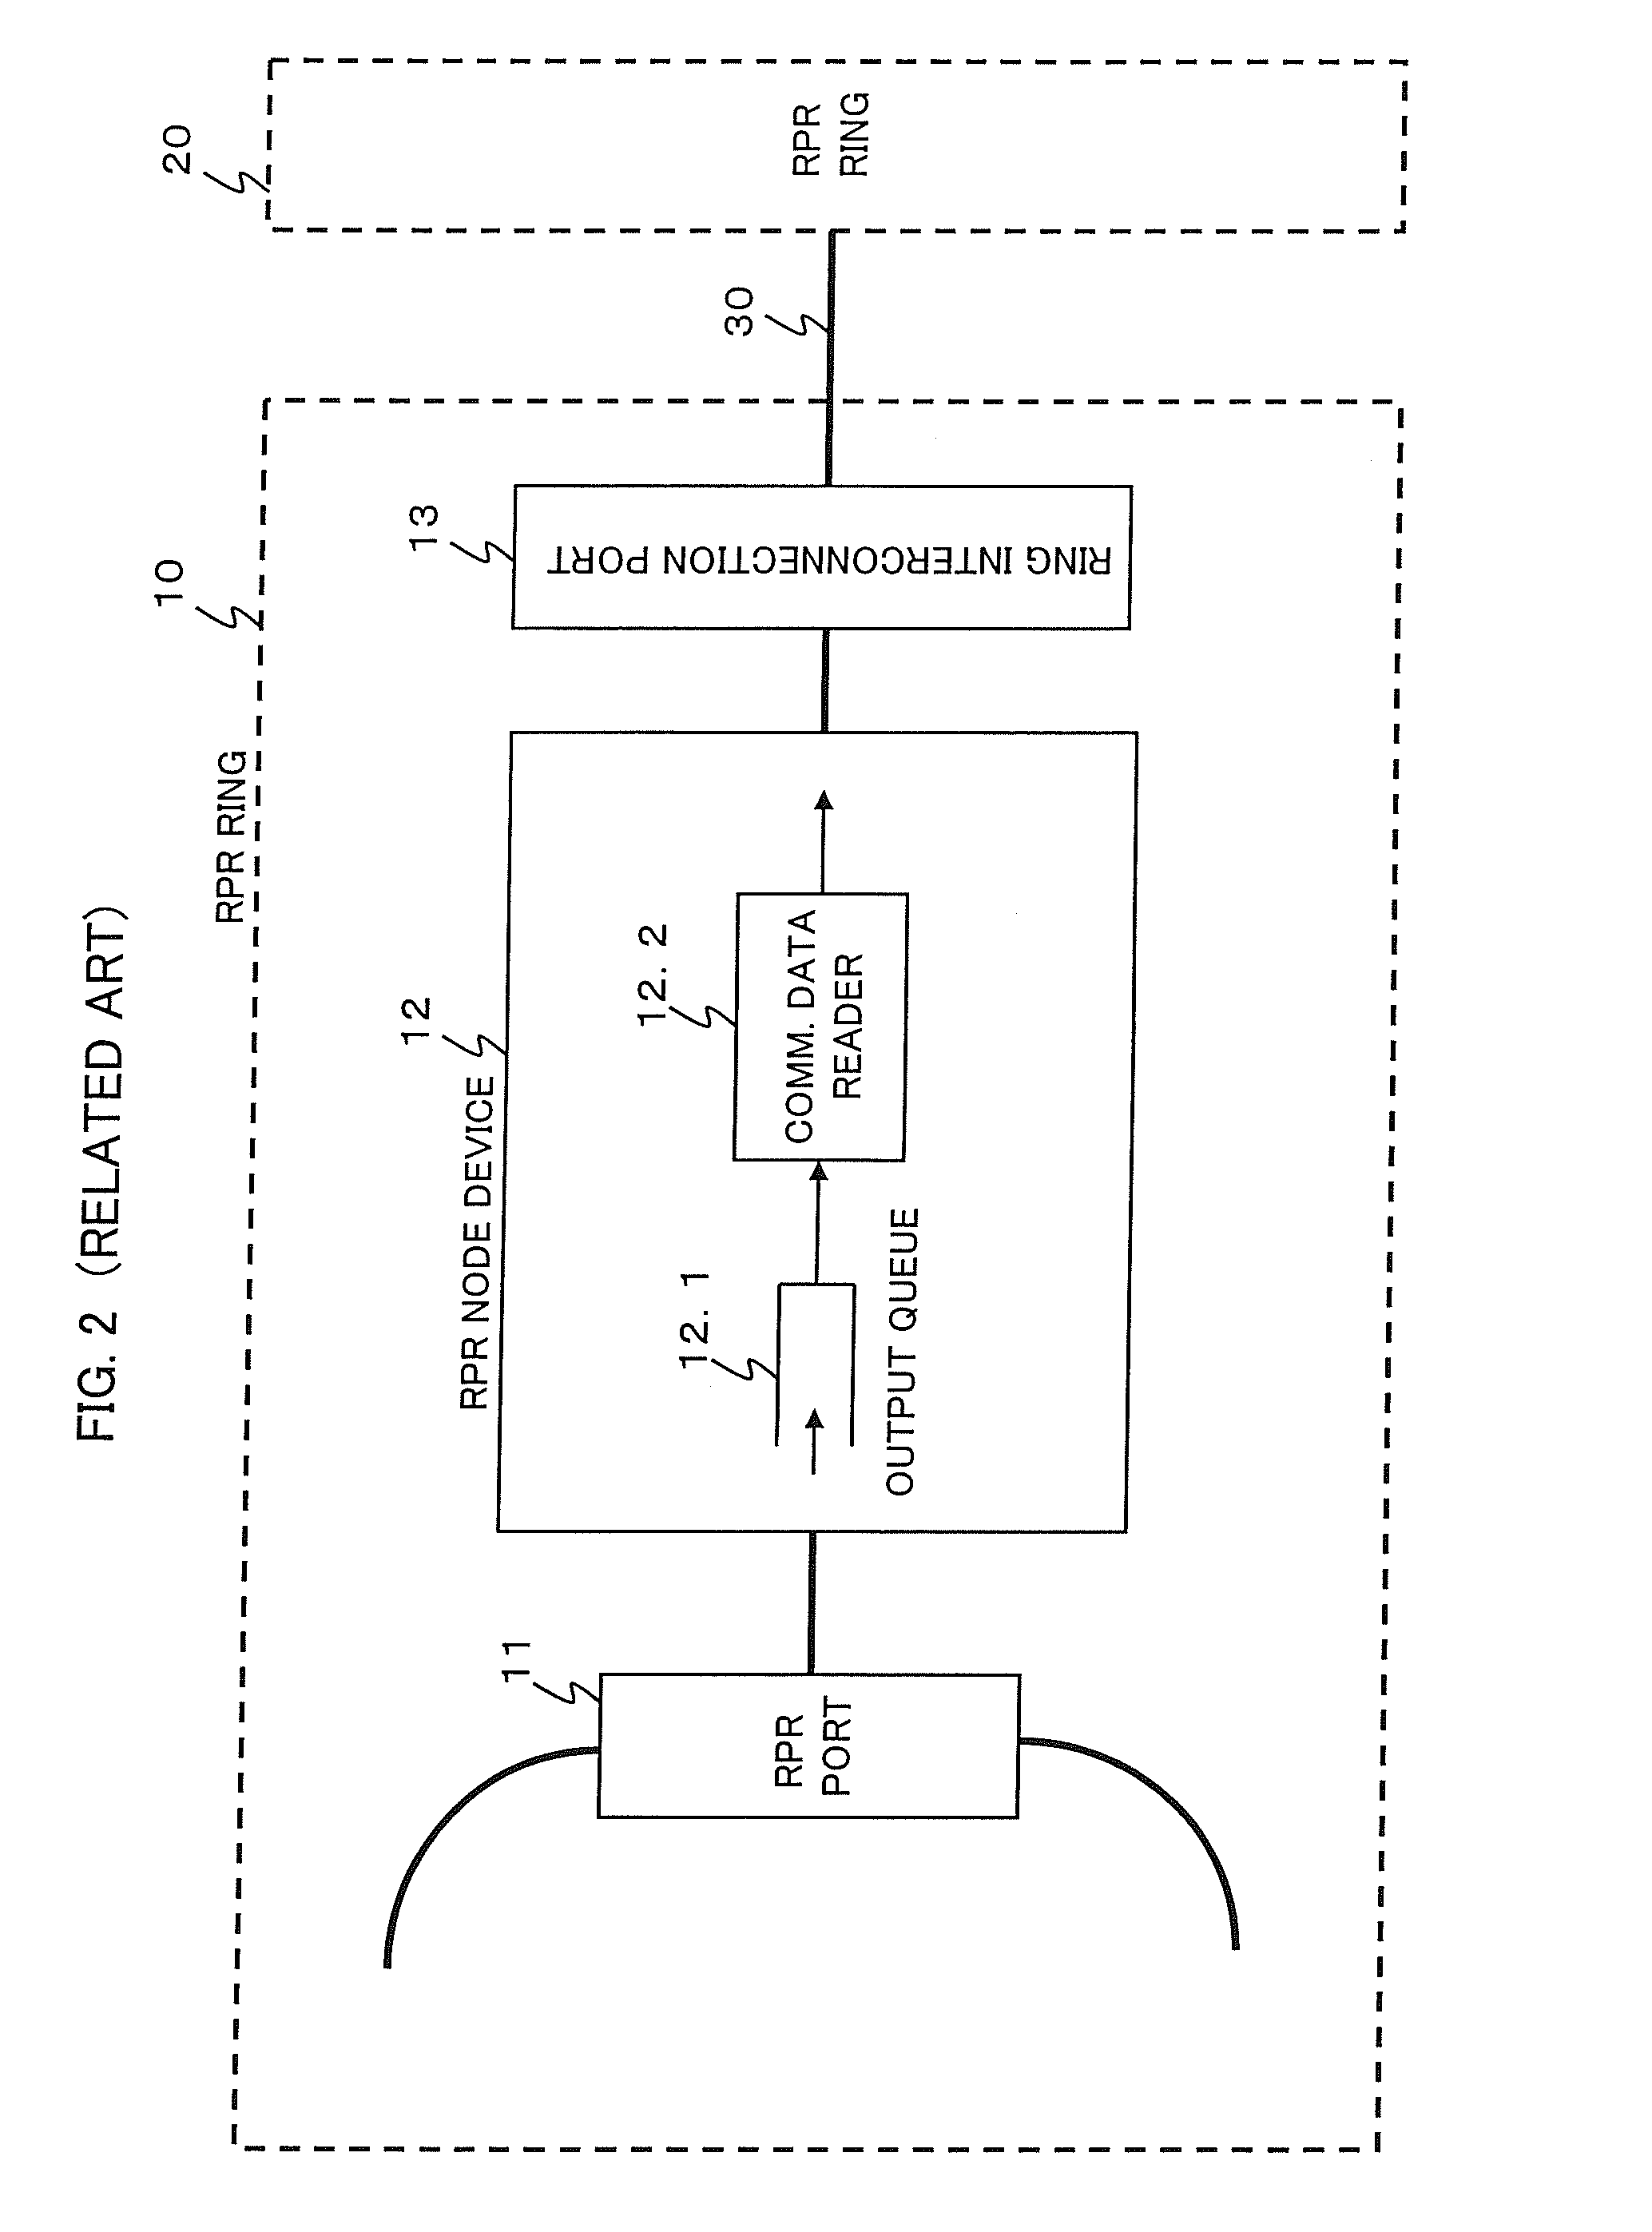 Inter-ring fairness control method and rpr node device